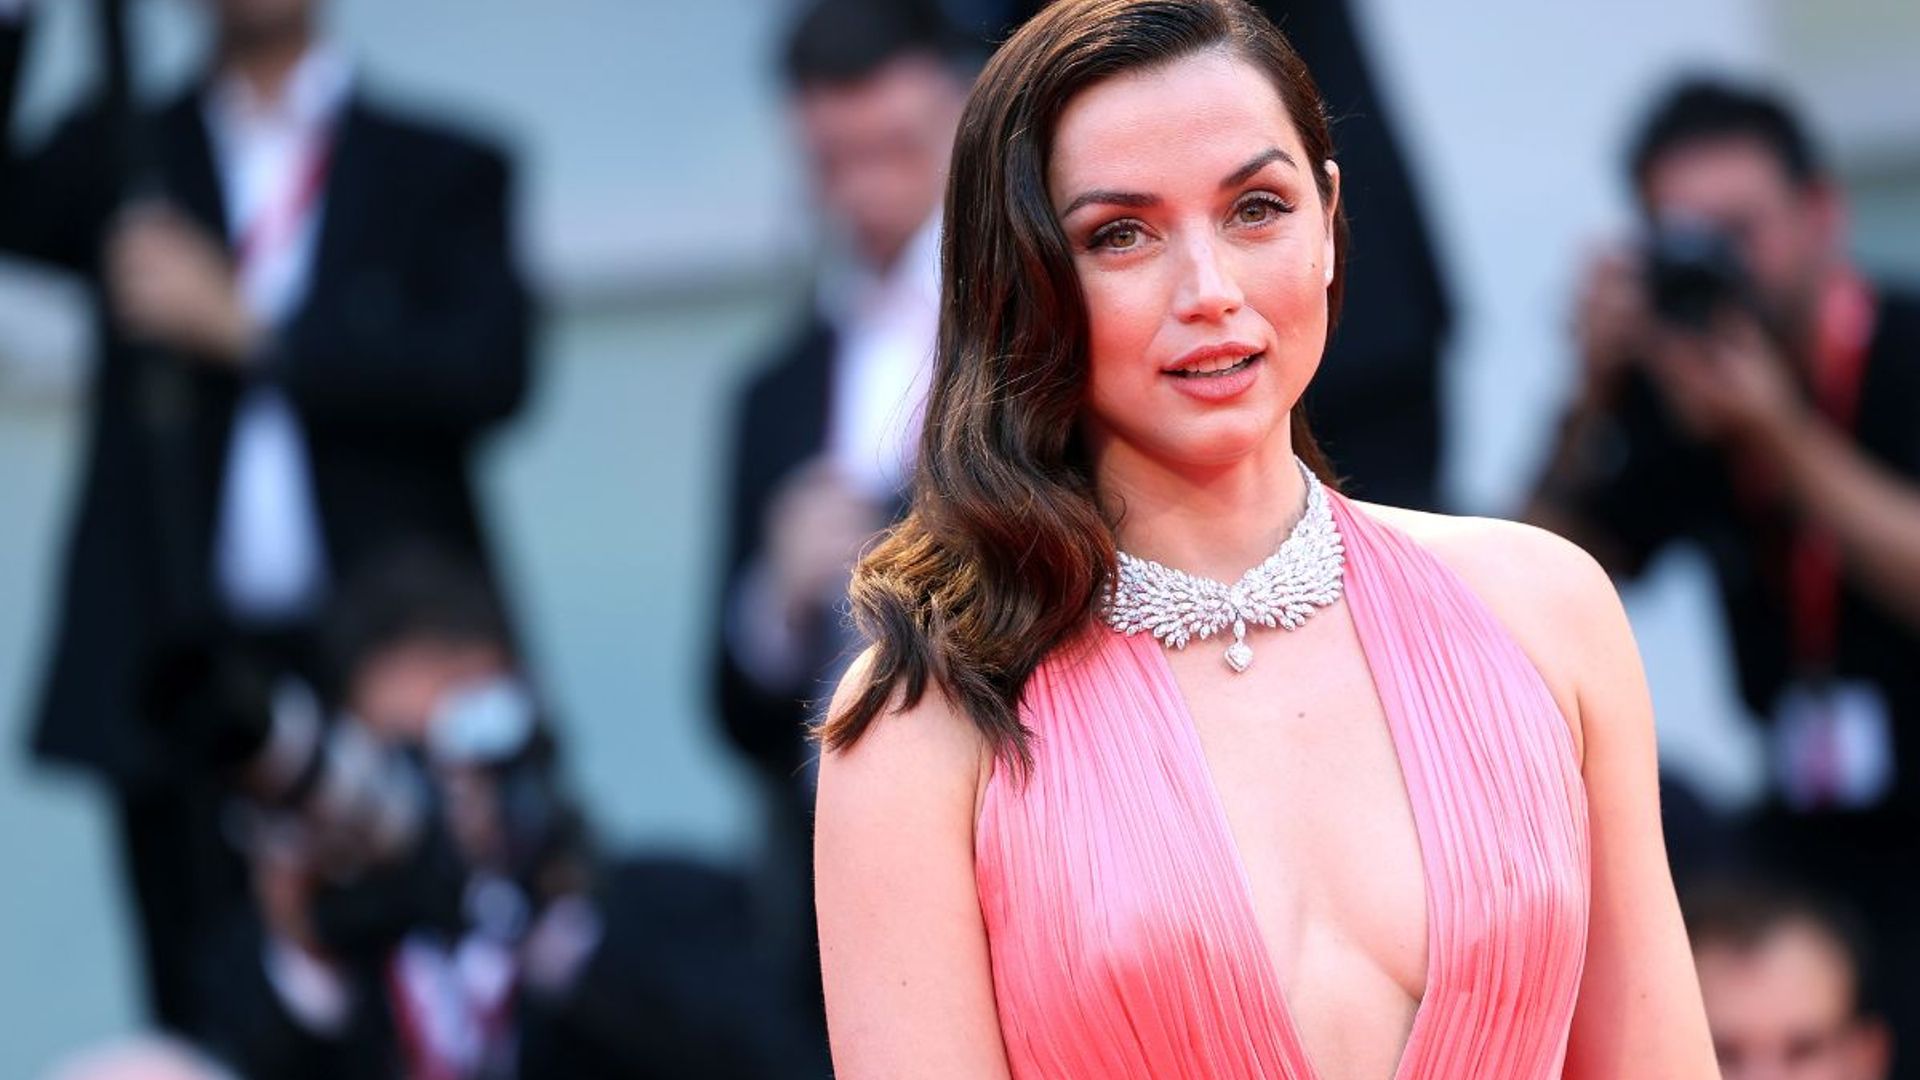 Oscars 2023: People Can't Believe Ana de Armas Was Nominated Over